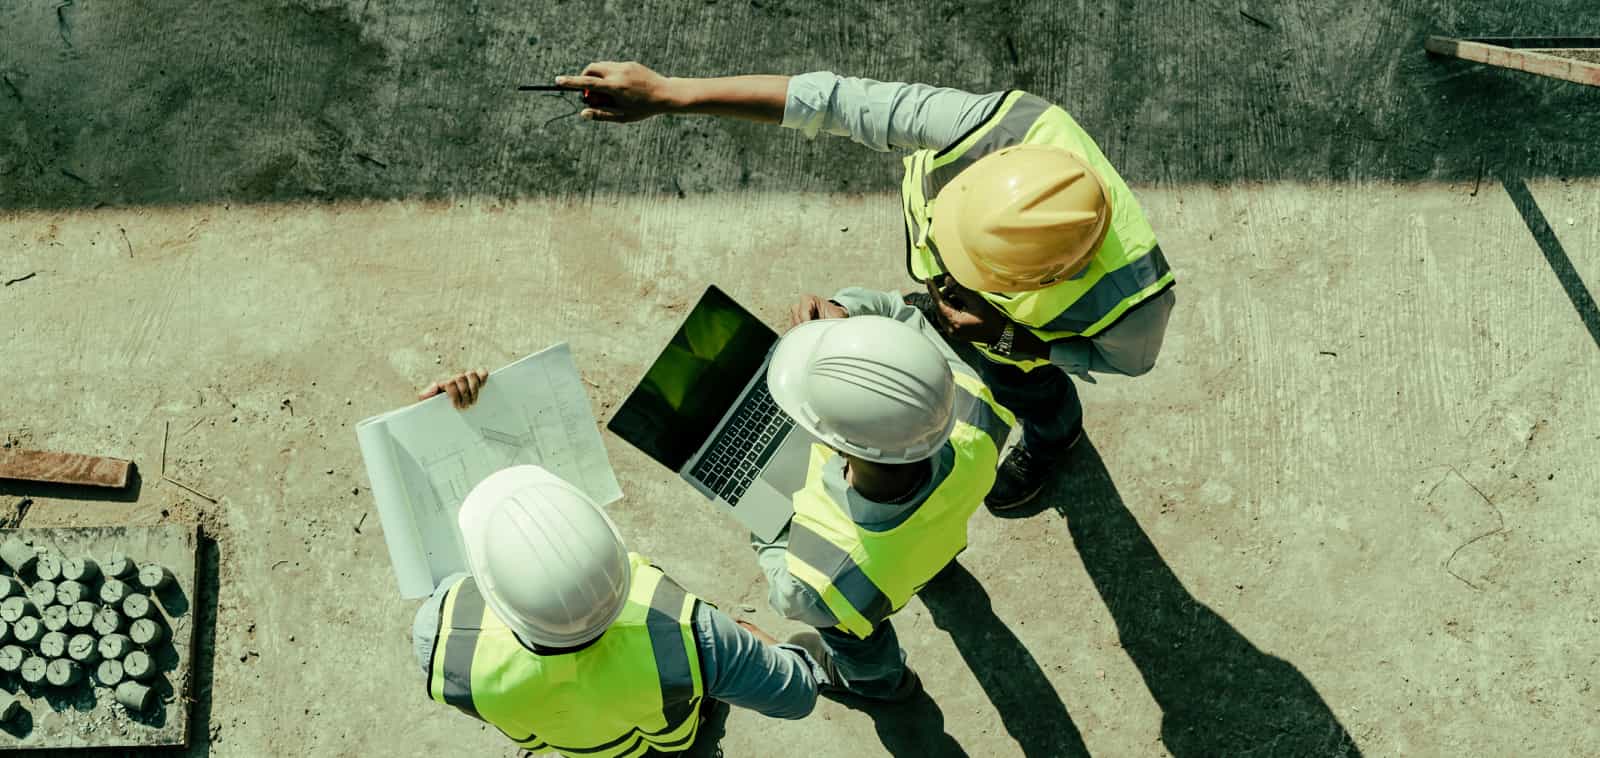 An overhead view of three people in hardhats reviewing paper plans and information on a laptop.